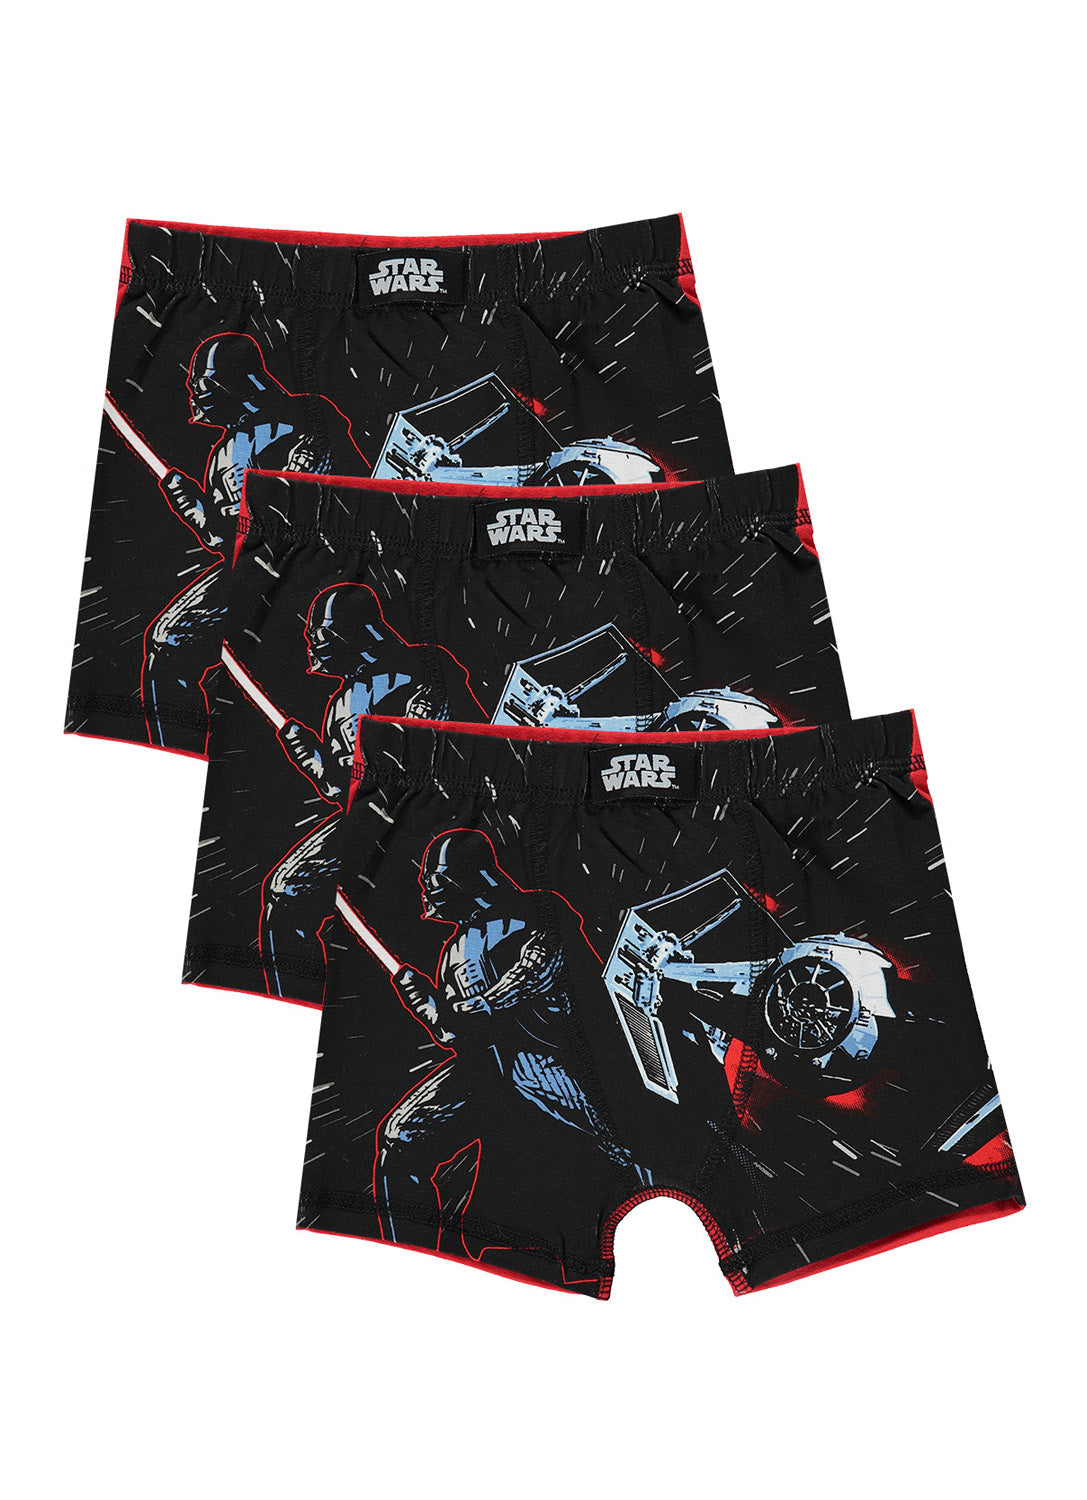 3 Boys Black Boxers with Star Wars print